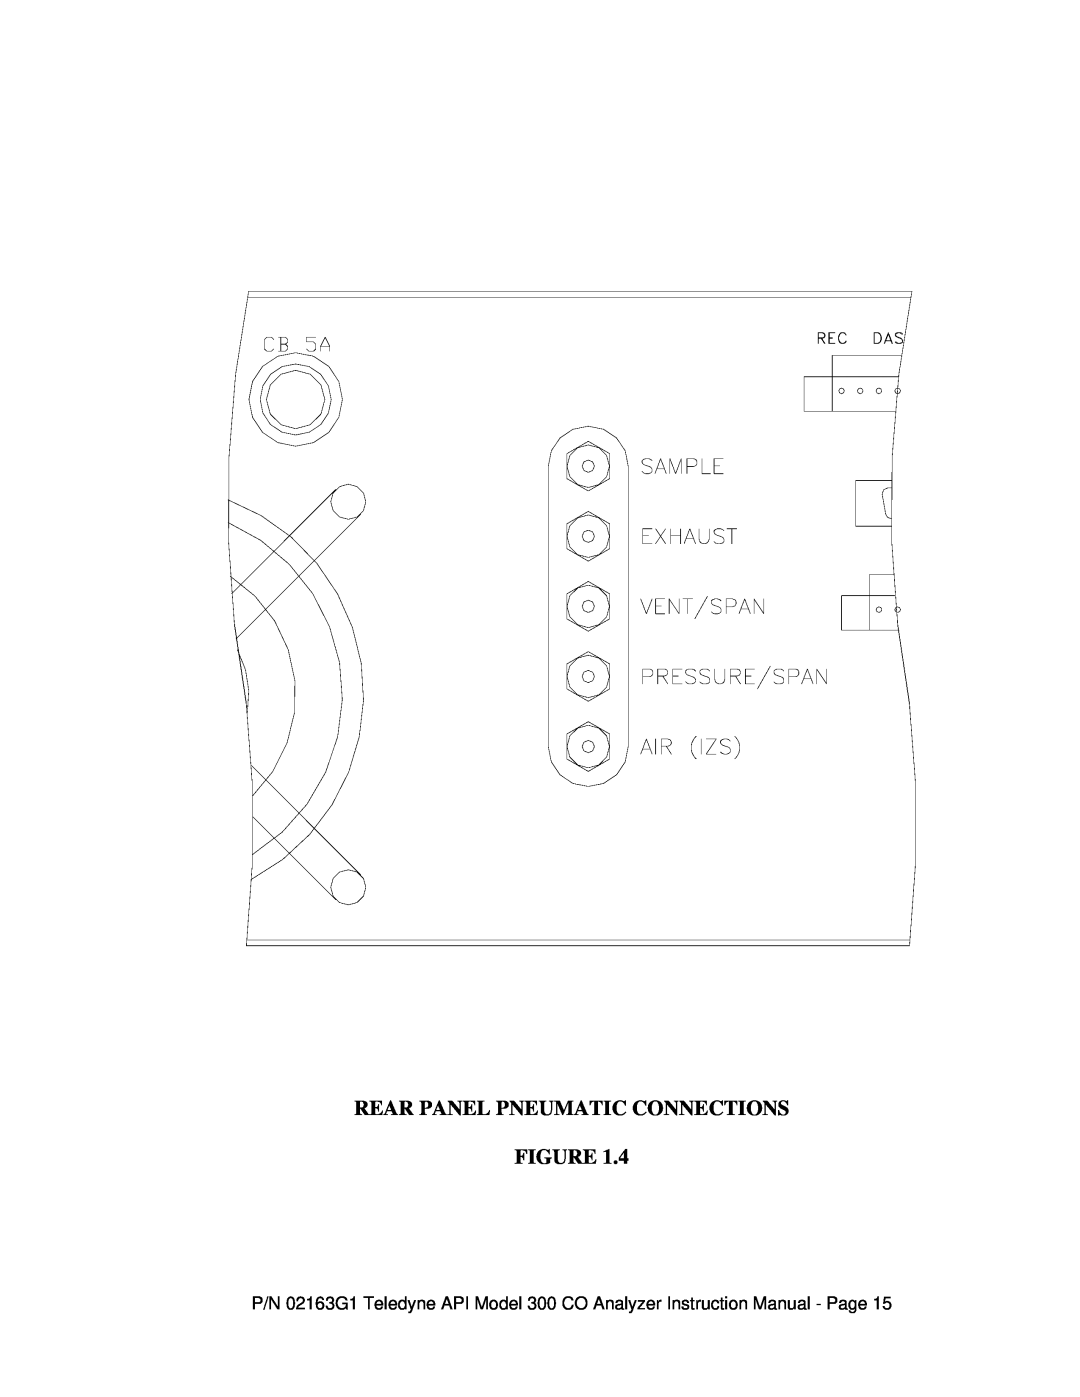 Teledyne 300 instruction manual Rear Panel Pneumatic Connections Figure 